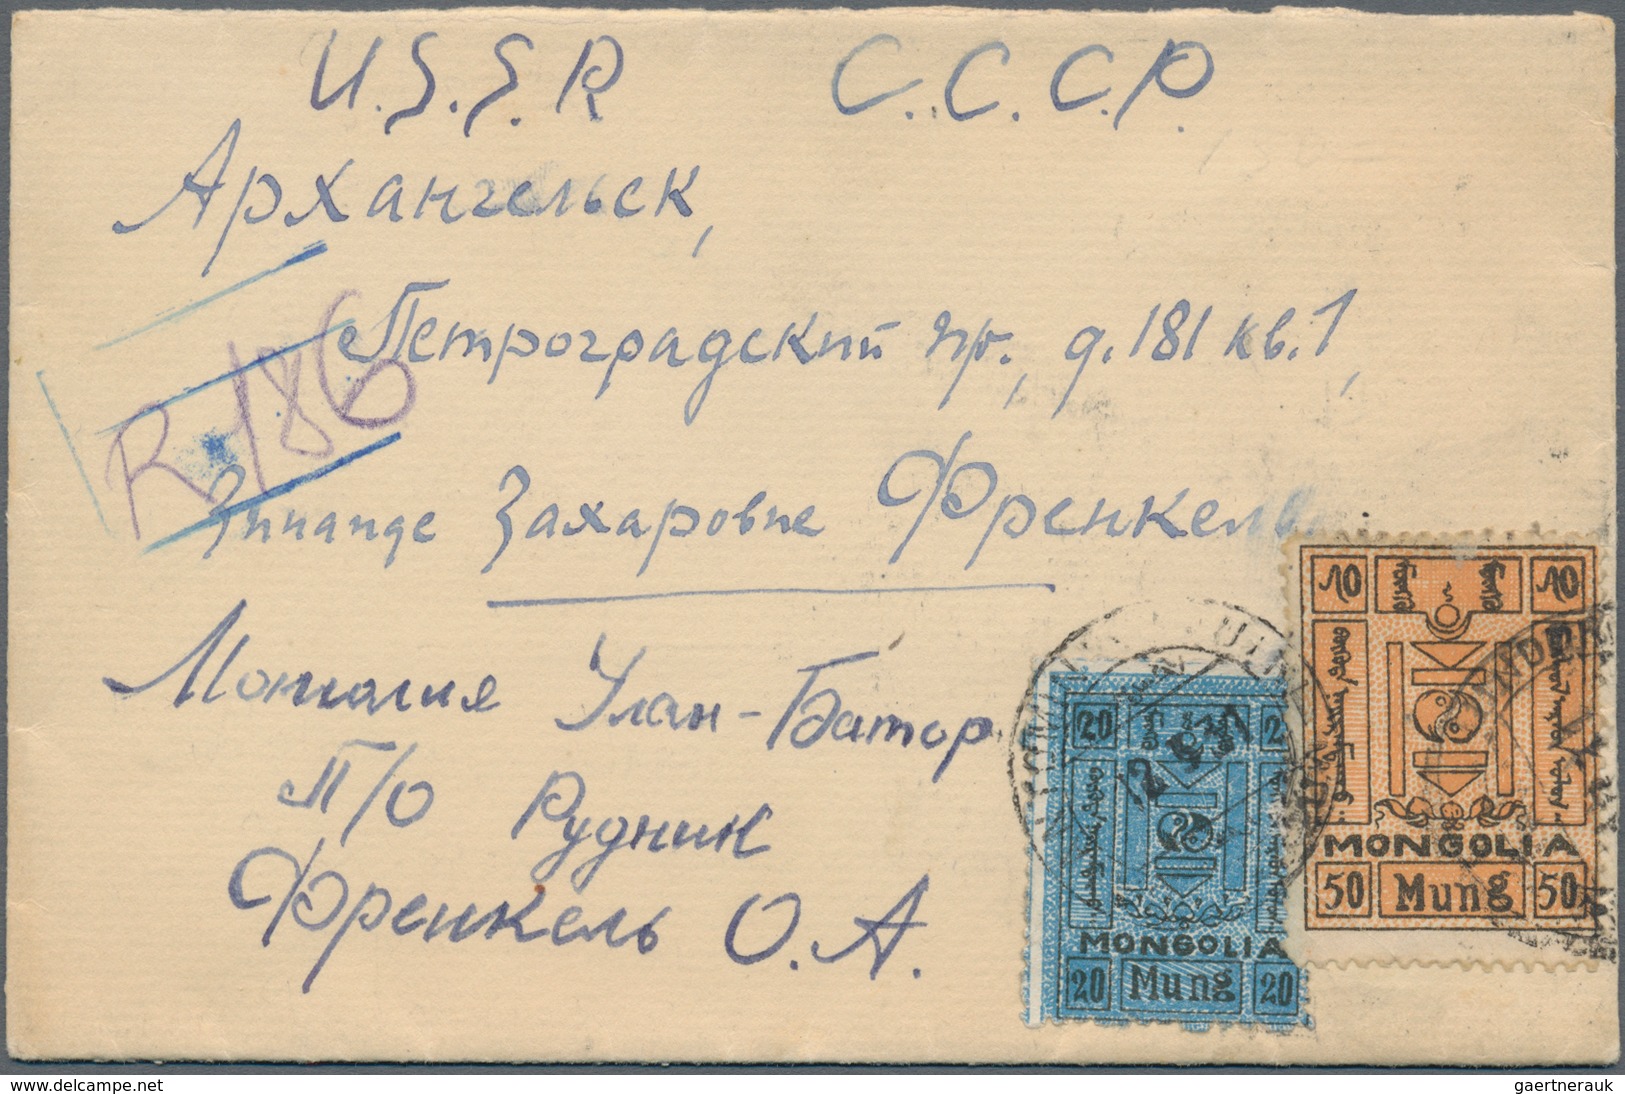 Mongolei: 1926/29, 20 Mung And 50 Mung Tied "ULANTOMIN... 12 3 31" To Registered Cover To USSR With - Mongolei